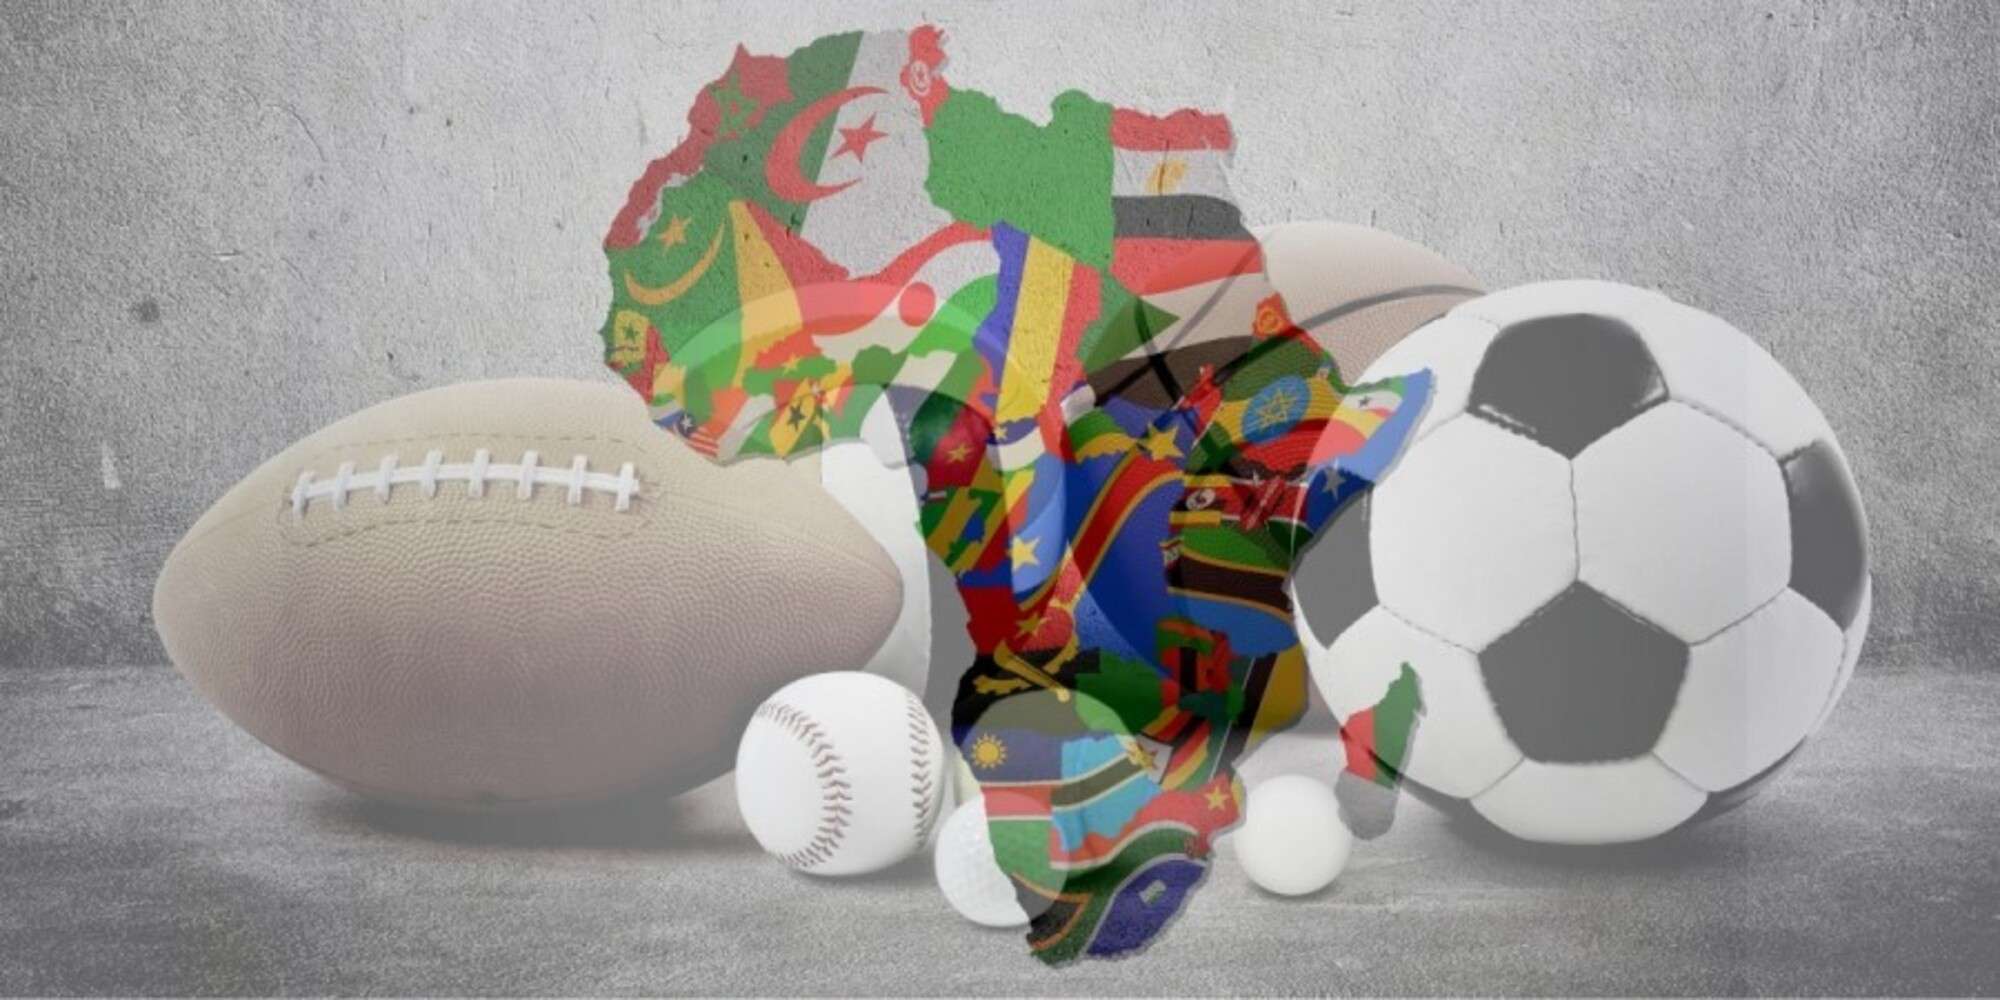 Most Popular Sports in Africa